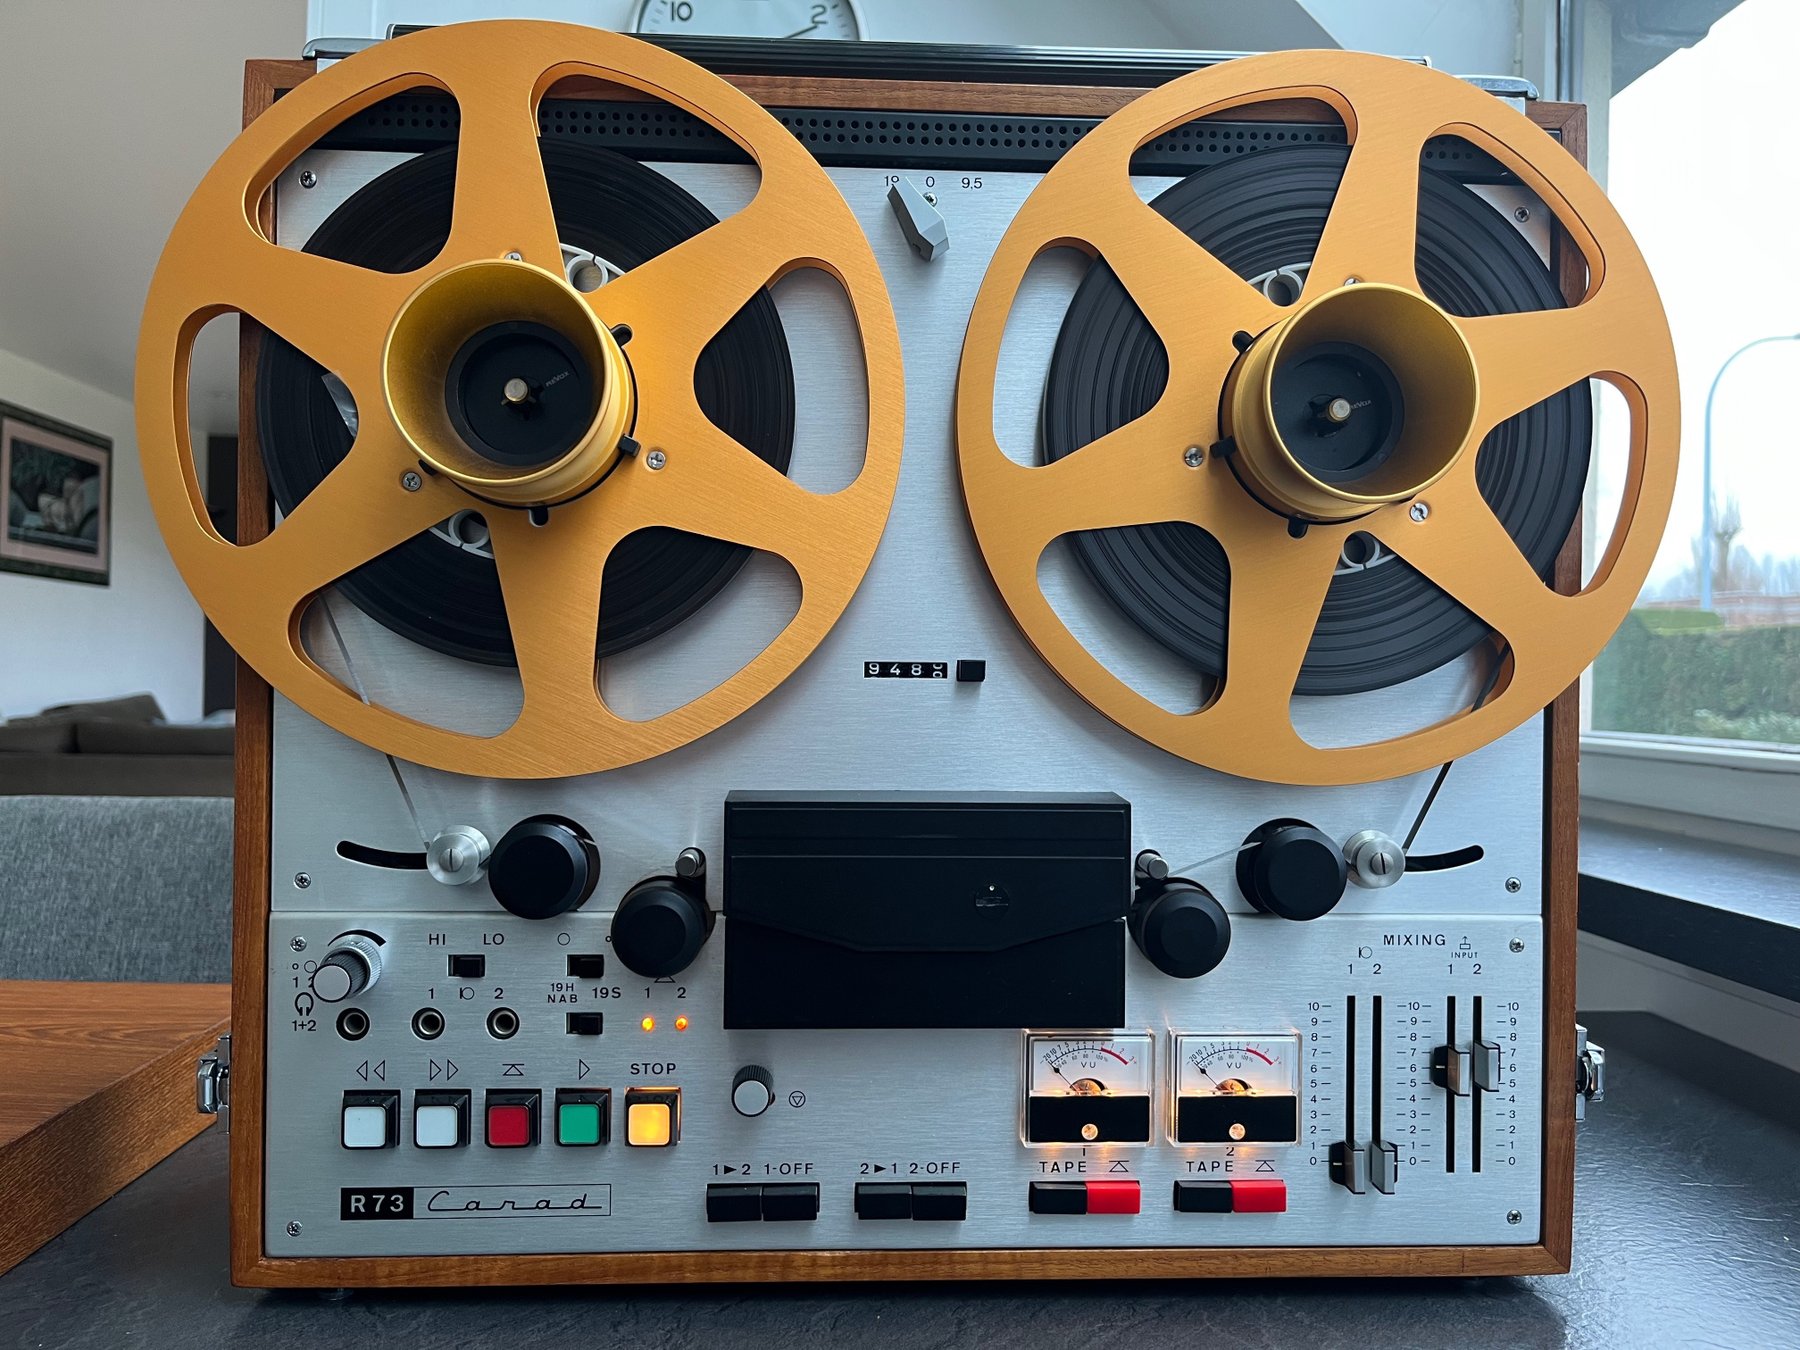 Reel to reel - The peak of audio quality and sophistication